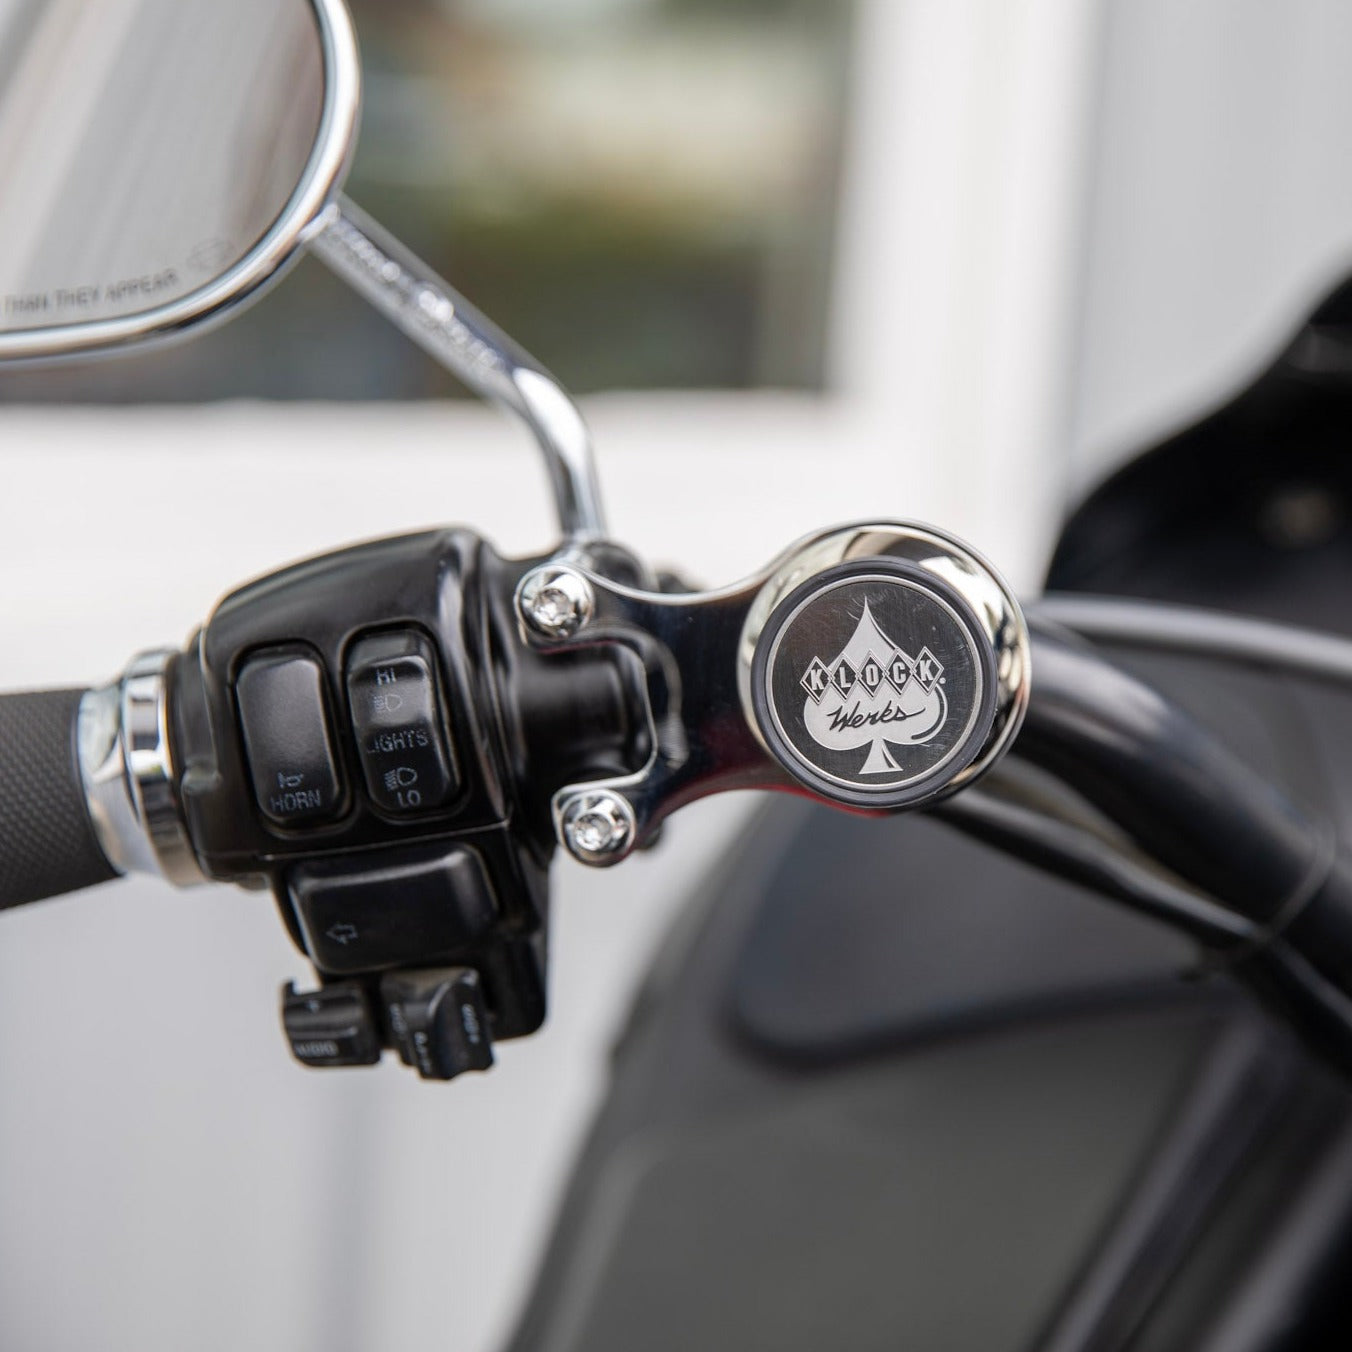 1996-2023 Ambidextrous Magnetic Phone Mount for Harley-Davidson® Chrome on bike (1996-2023 - Chrome Ambidextrous Mount on bike)